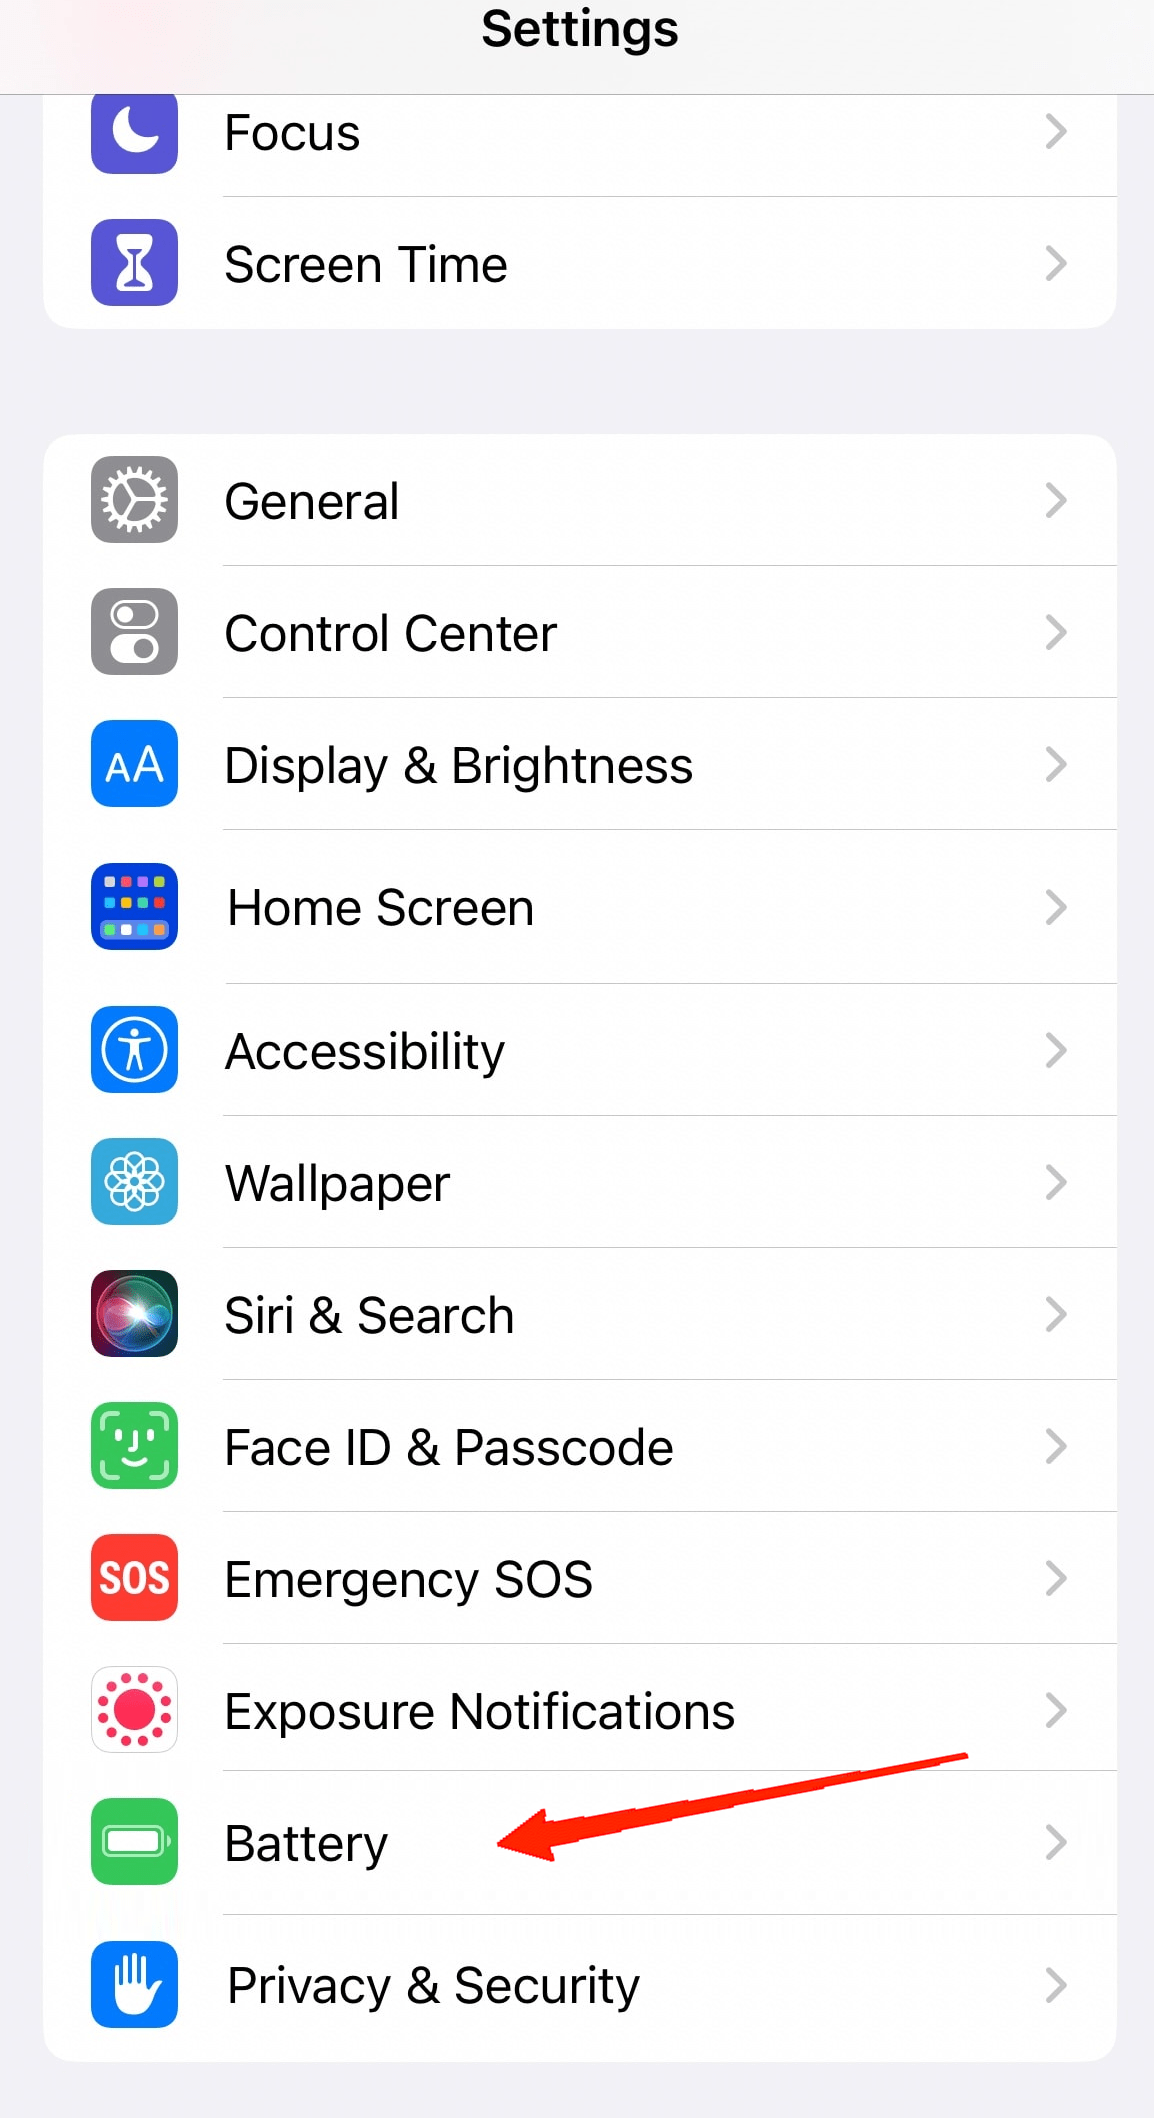 tap on the Battery option